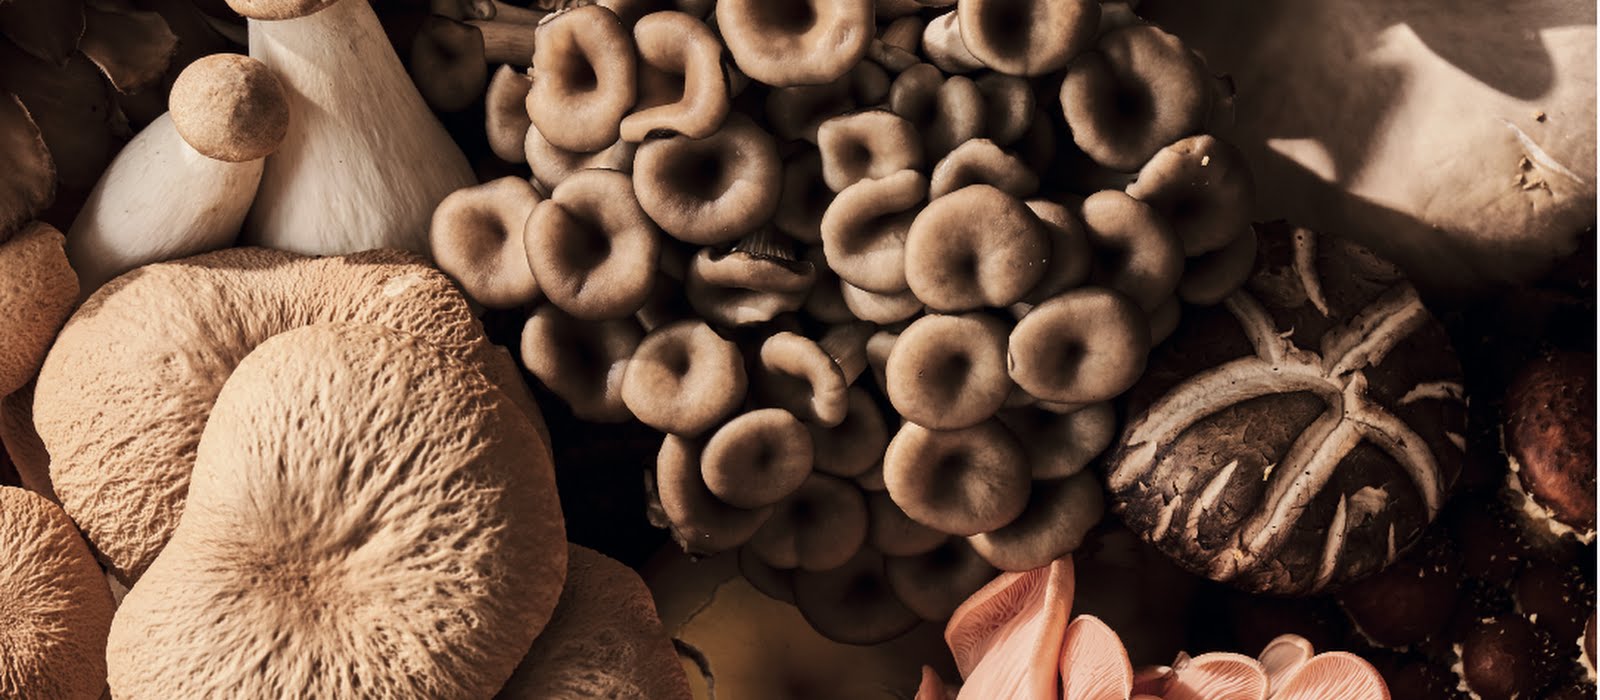 Much ado about mushrooms: inside the fungi revolution